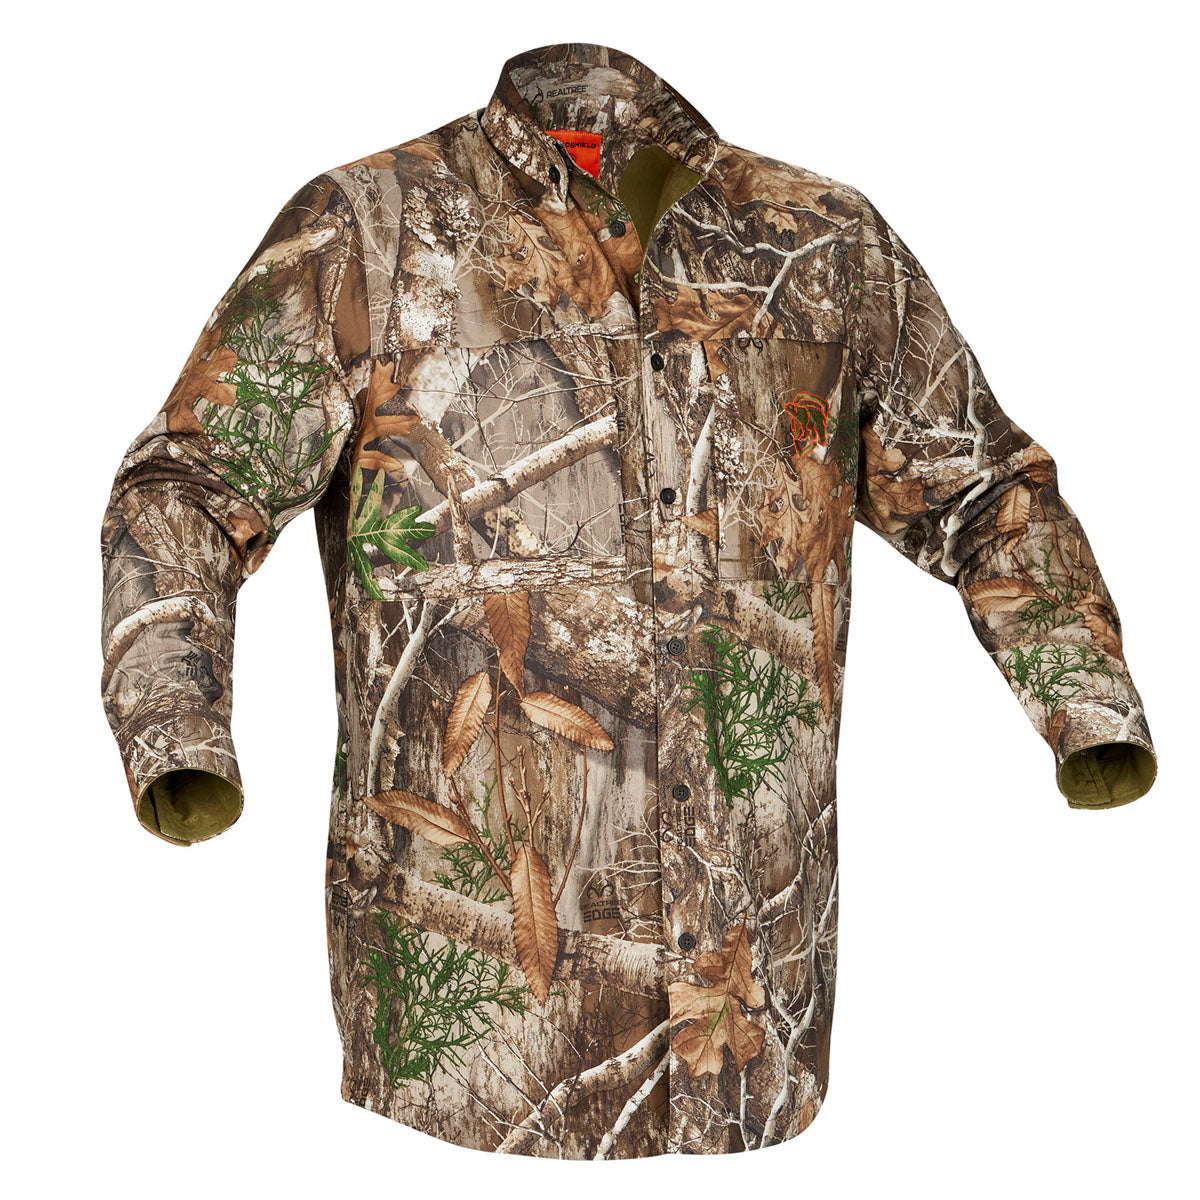 Mens Hunting Apparel | Purchase Insulated Hunting Jackets